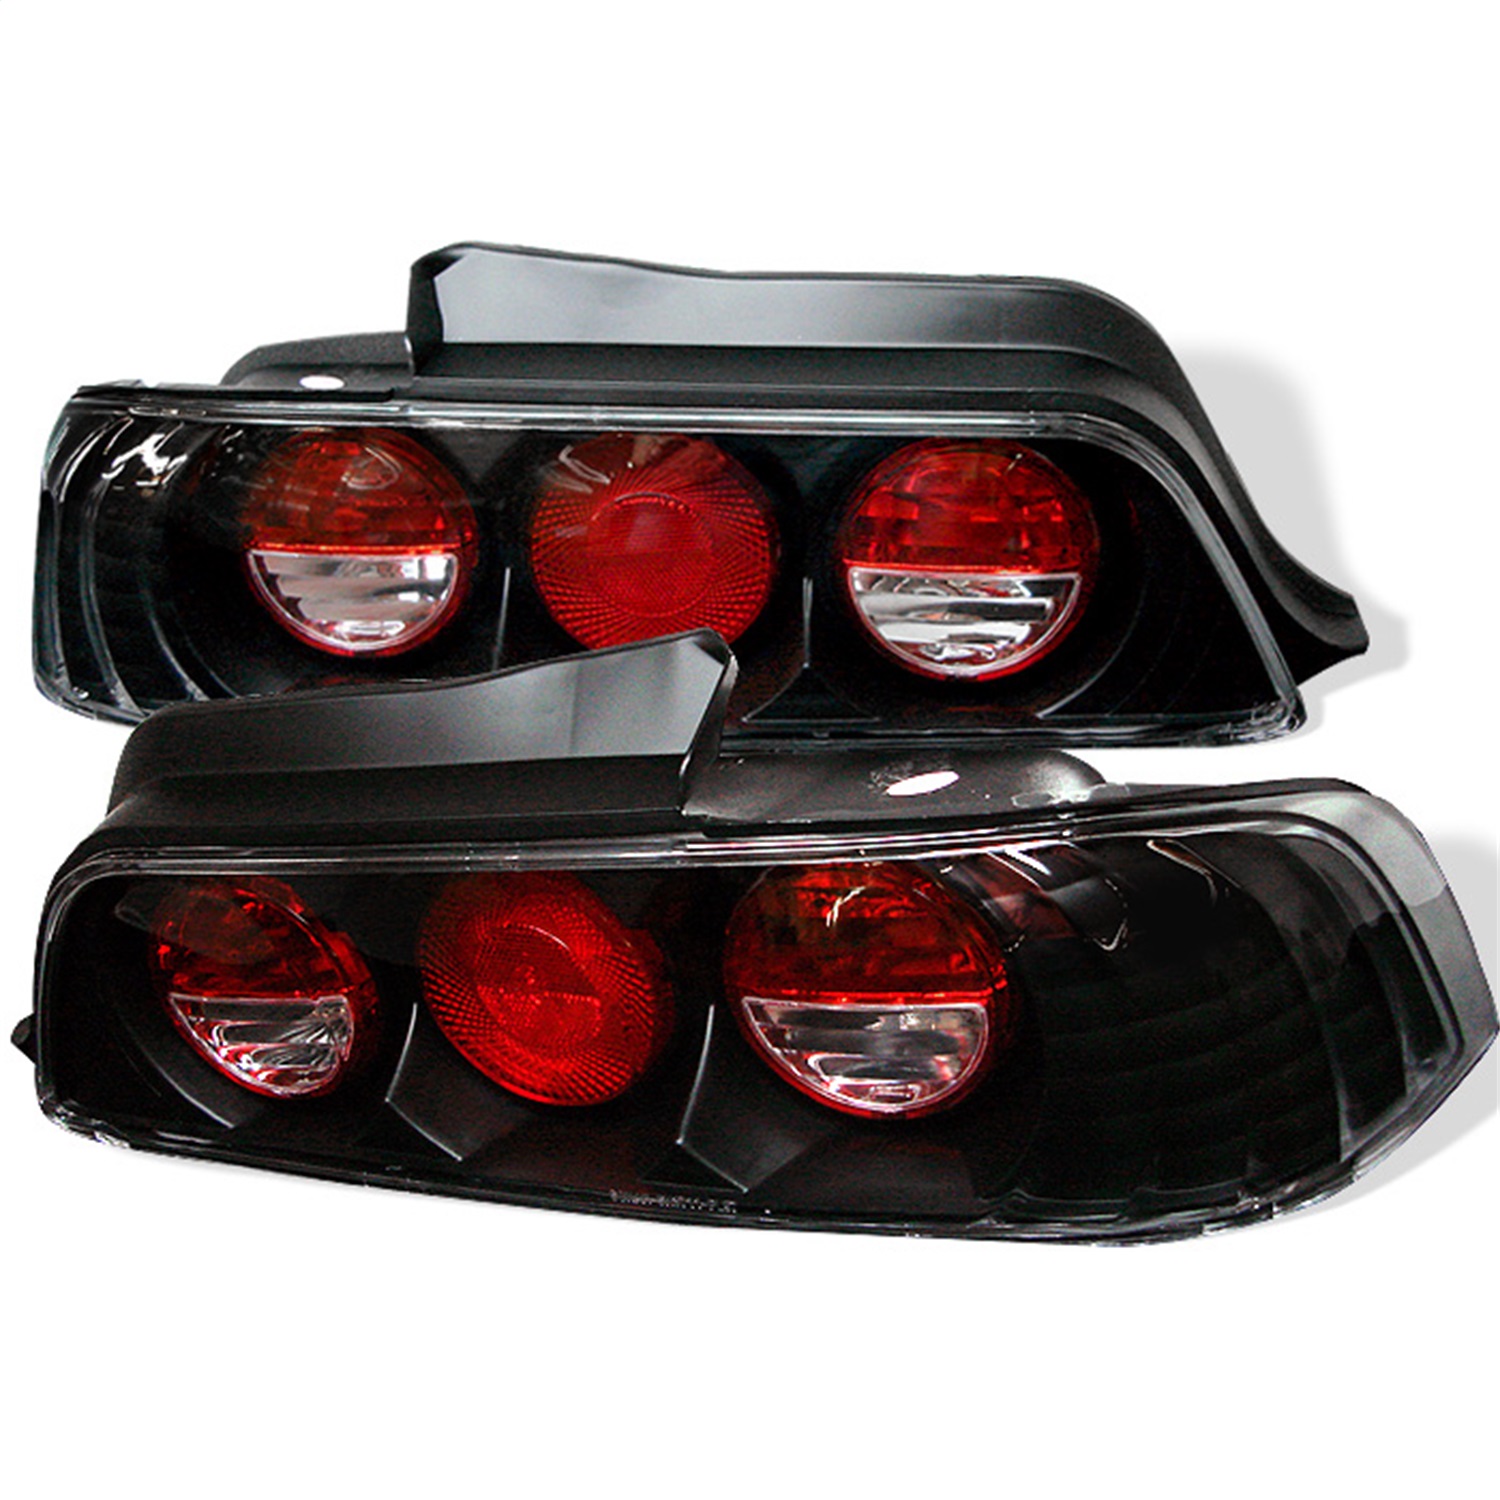 Spyder Auto 5005274 Euro Style Tail Lights Fits 97-01 Prelude